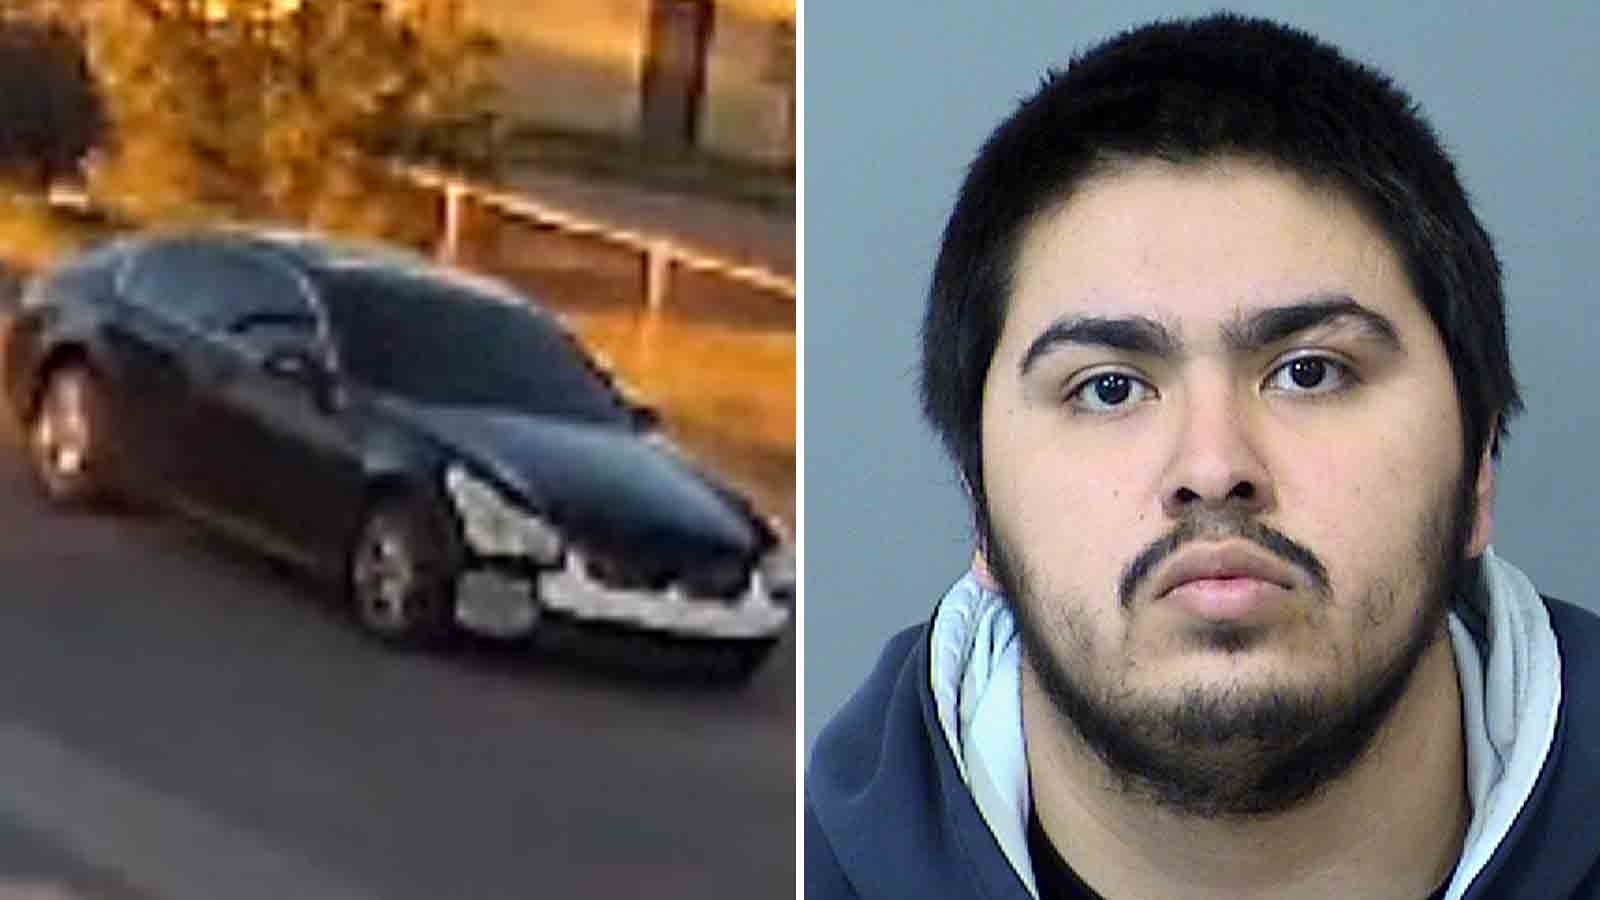 Mugshot and image of suspect's car...